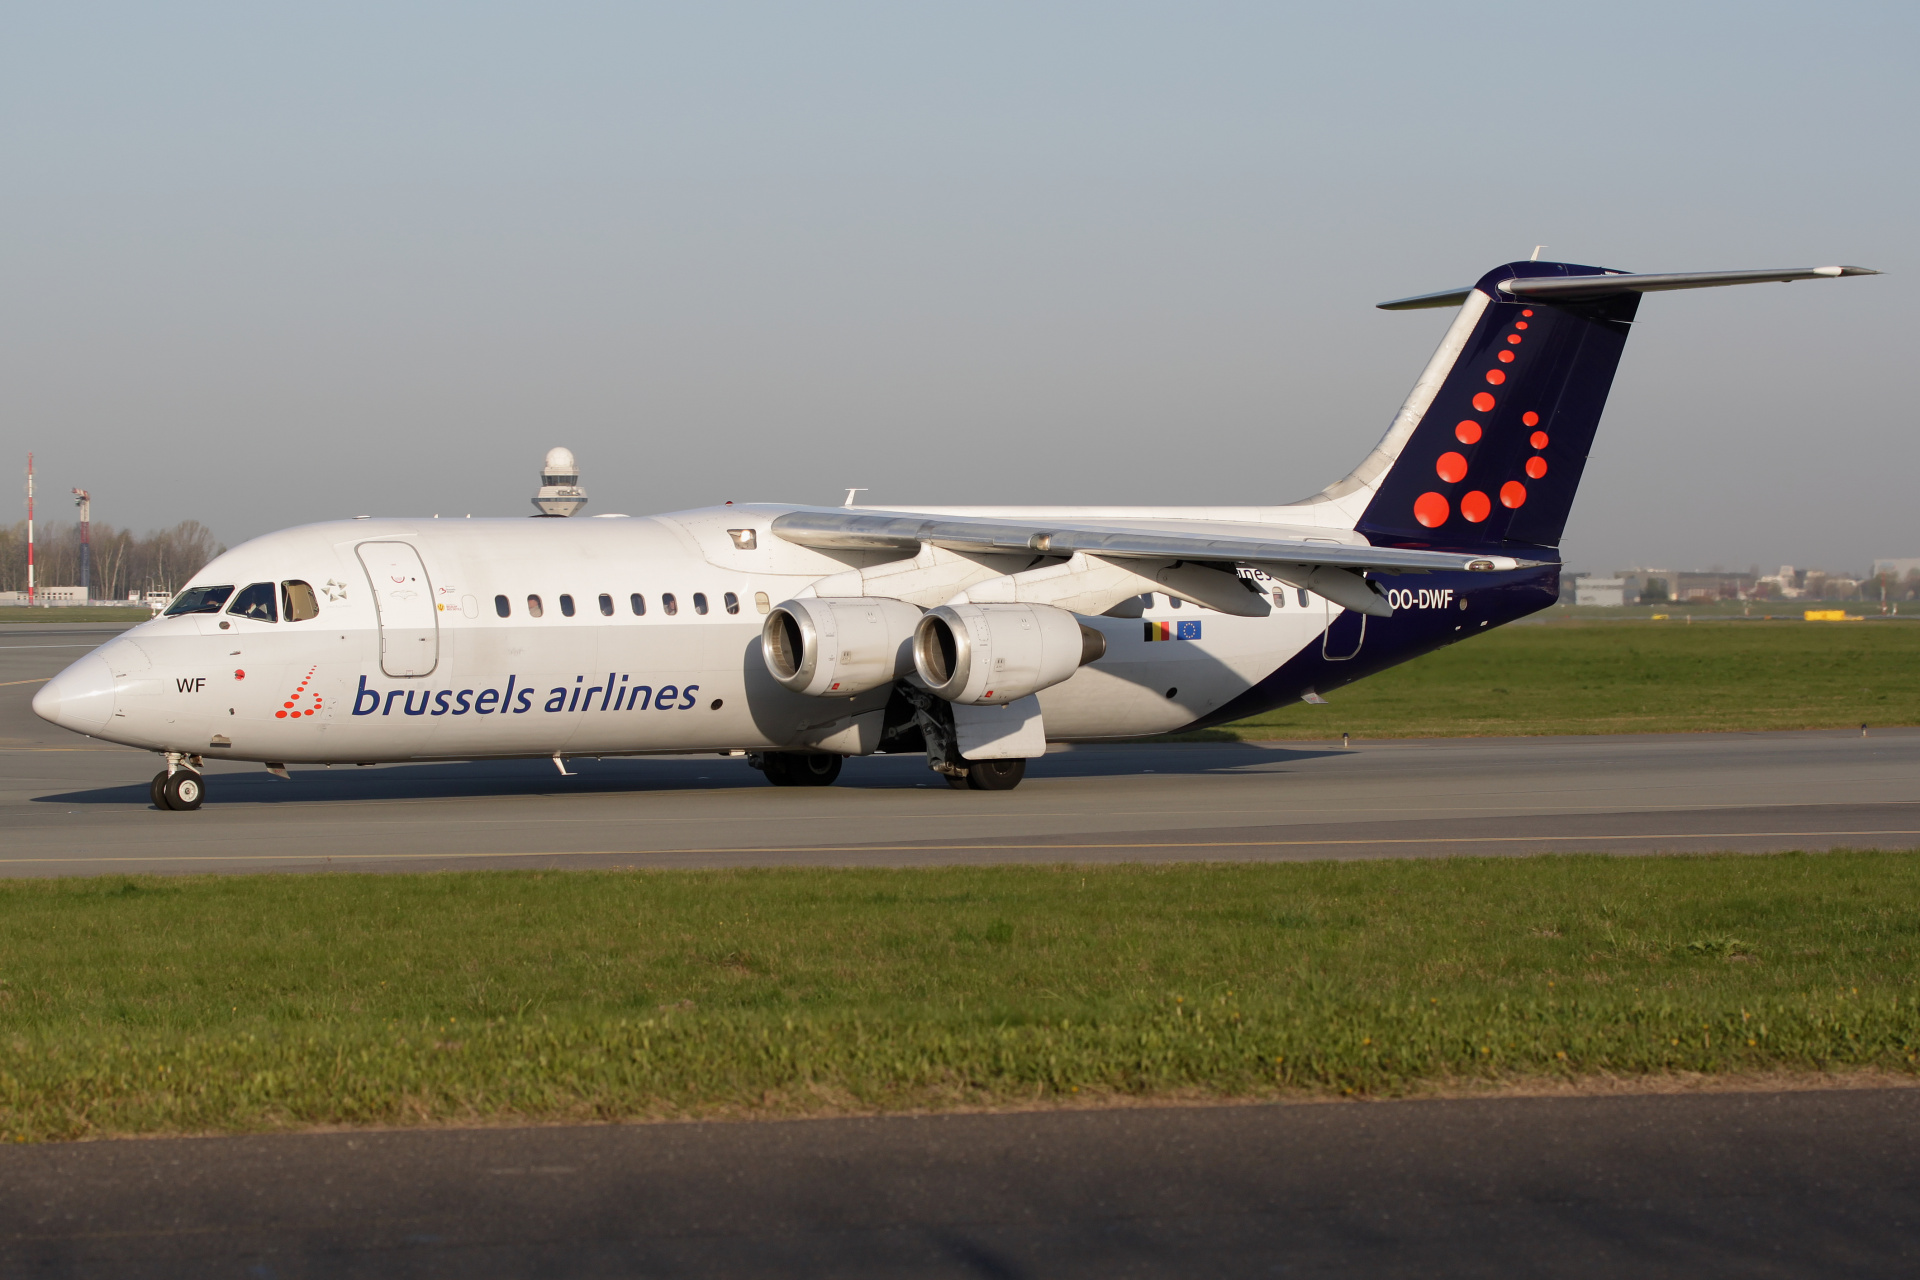 OO-DWF (Aircraft » EPWA Spotting » BAe 146 and revisions » Avro RJ100 » Brussels Airlines)